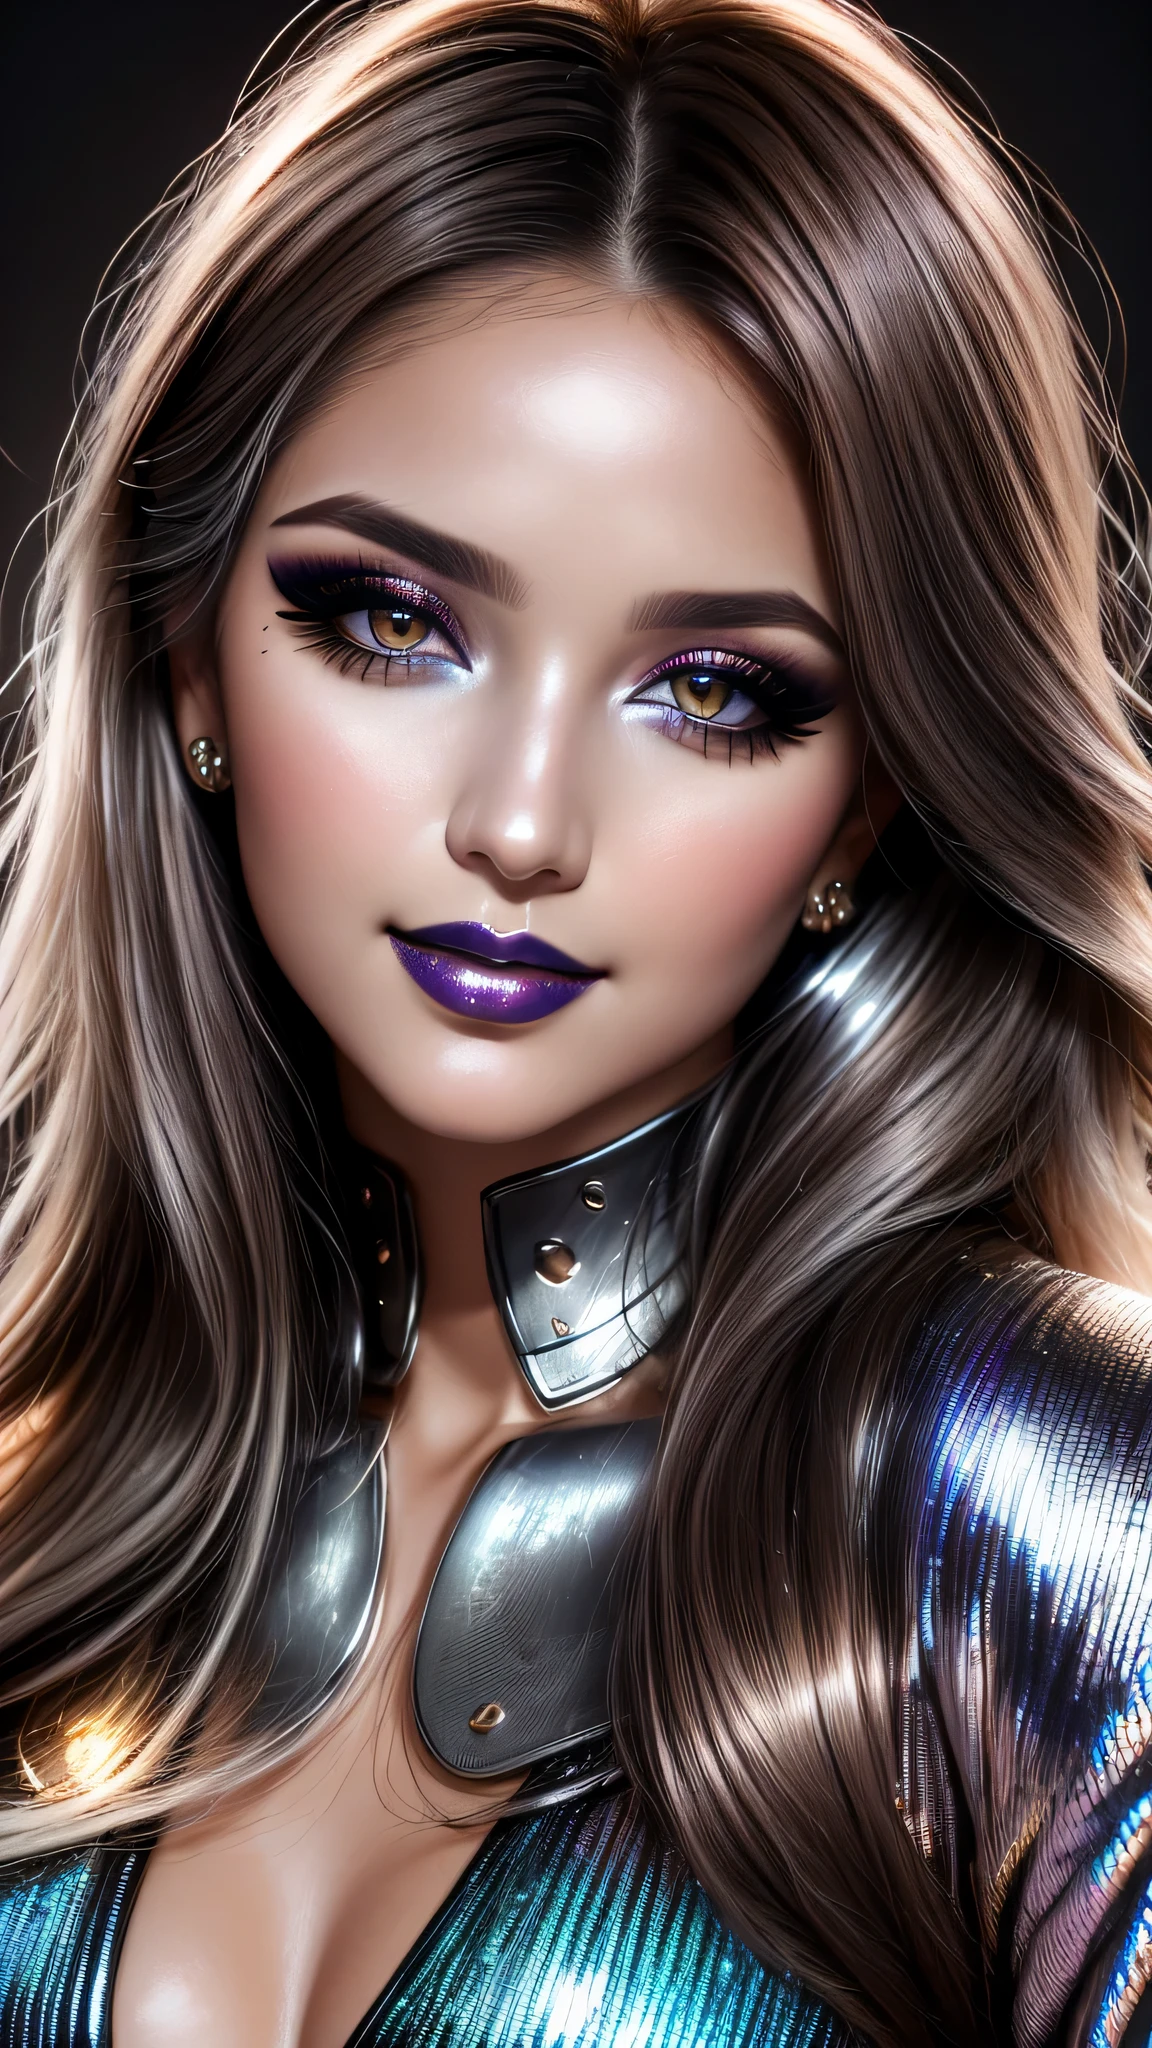 Ultra-realistic movie master pie with ultra-detailed primetime portraits, high quality, 8K, table top, Ultra HD), 1 girl 25 years old、fashion supermodel, ((Random style and color hair)), masterpiece, high quality, high quality, High resolution、(close up of face), black_mascara put in Long eyelashes:1.5, dark (eyesshadows:1.35), (Glossy) silver_lips:1.34, ((brown_eyes)), (iridescent eyes), vibrant eyes:1.35, high contrast, dark shot:1.5, (seductive smile), ((metalic_makeup cheeks:1.3))